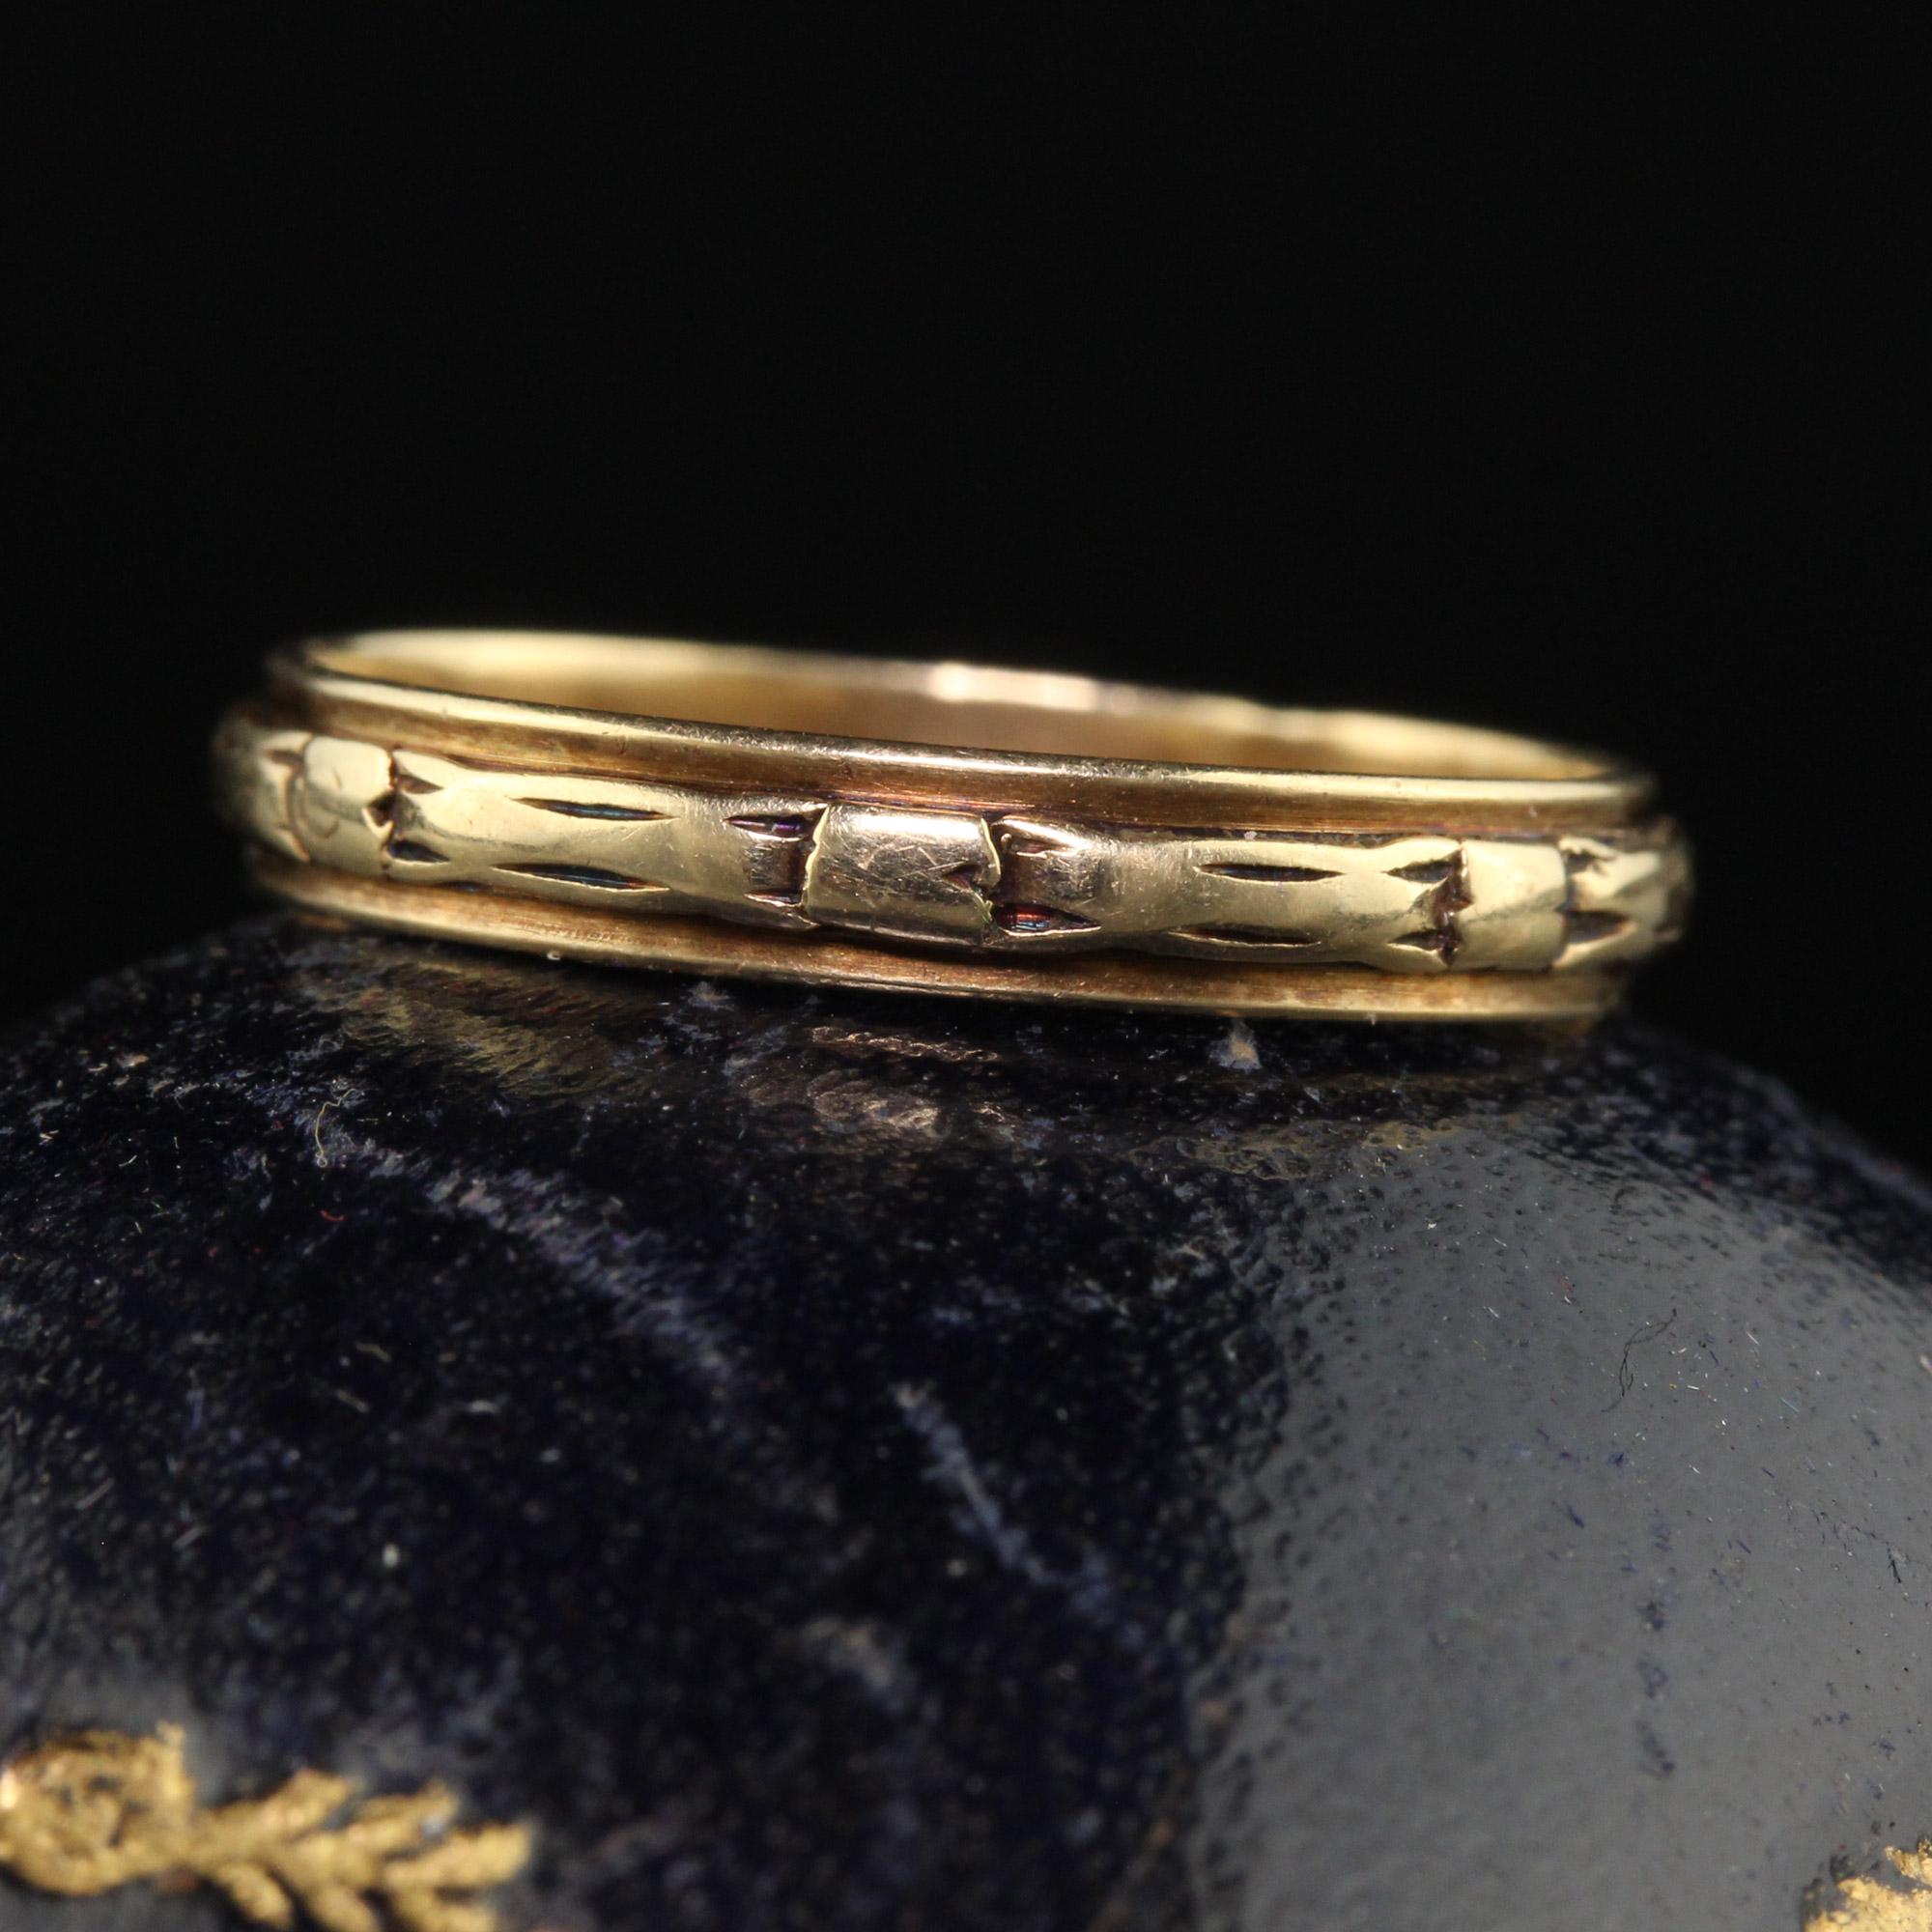 Beautiful Antique Art Deco Lohengrin 14K Yellow Gold Engraved Wedding Band - Size 8. This gorgeous wedding band is crafted in 14k yellow gold. The engraved design goes around the entire ring and is in good condition. The ring sits low on the finger